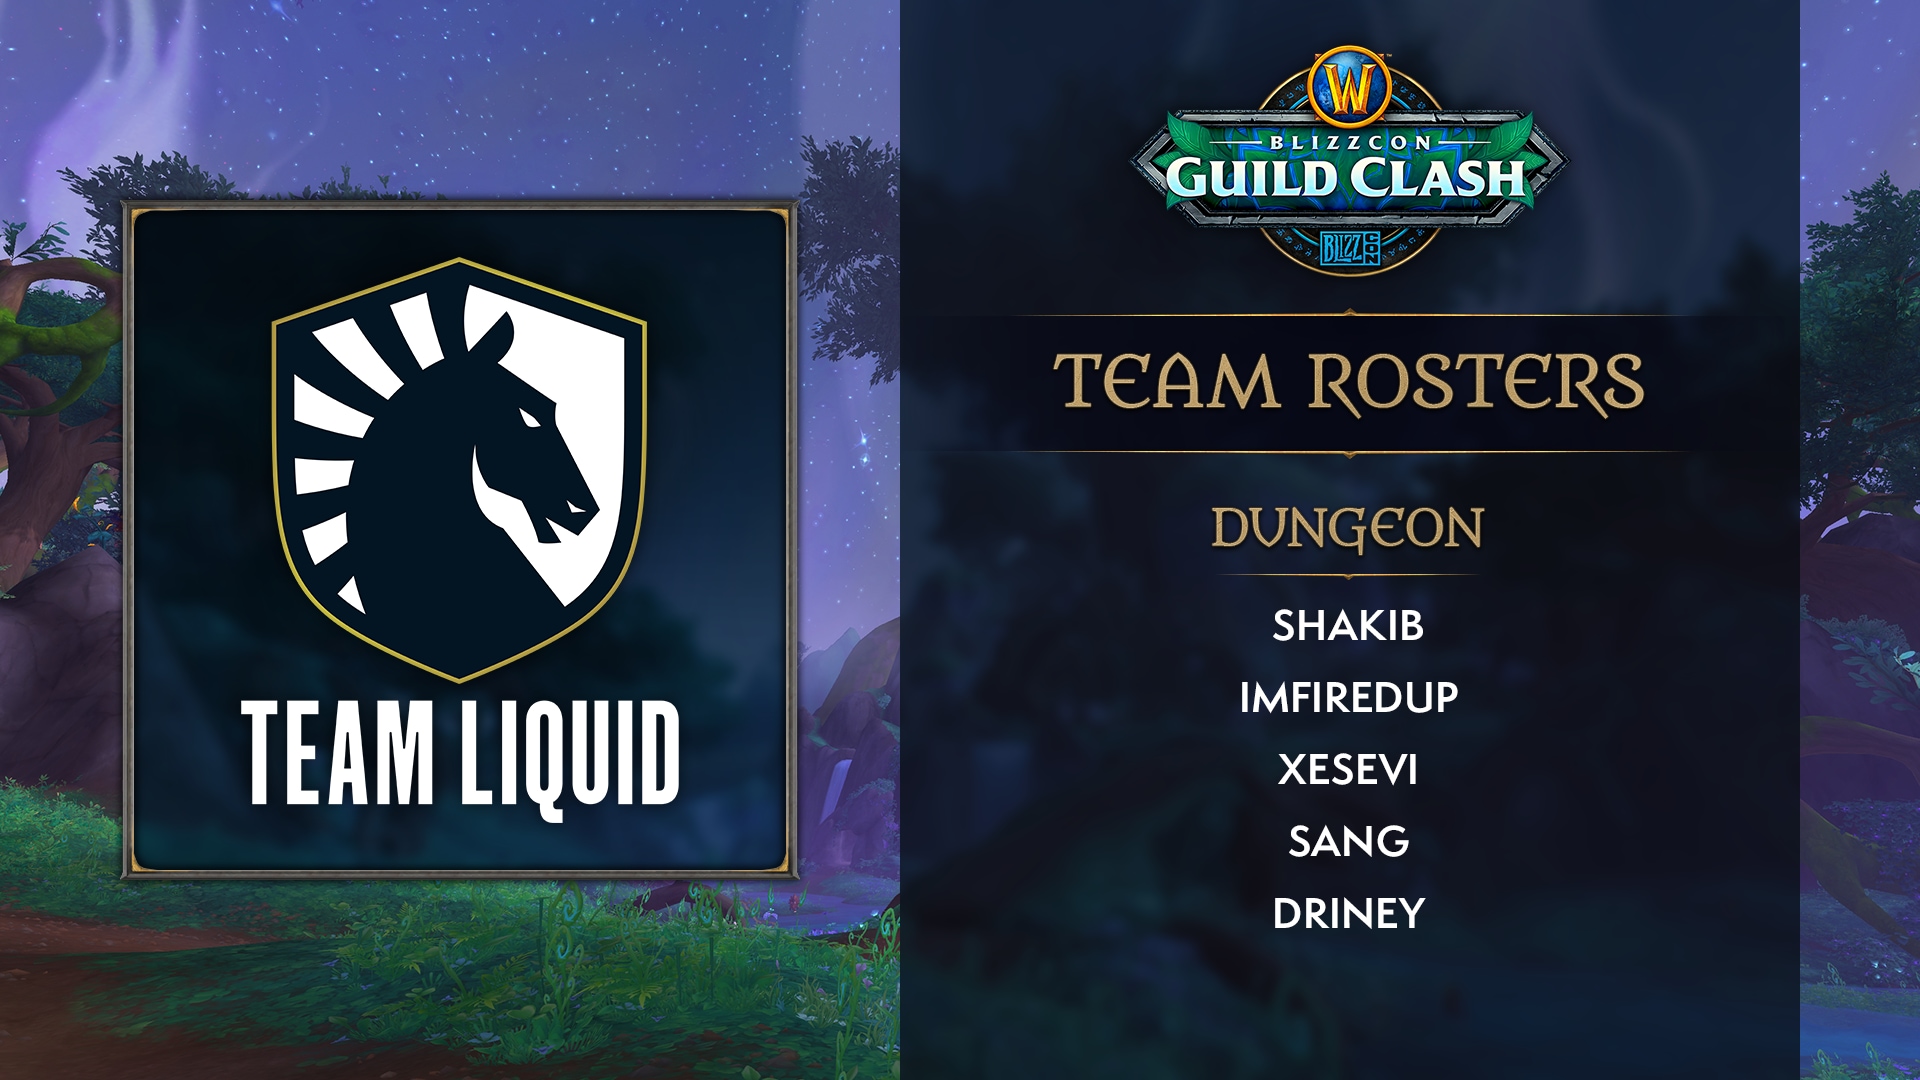 WoW_Esports_Blizzcon_GuildClash_TeamRoster_liquid_dungeon.png